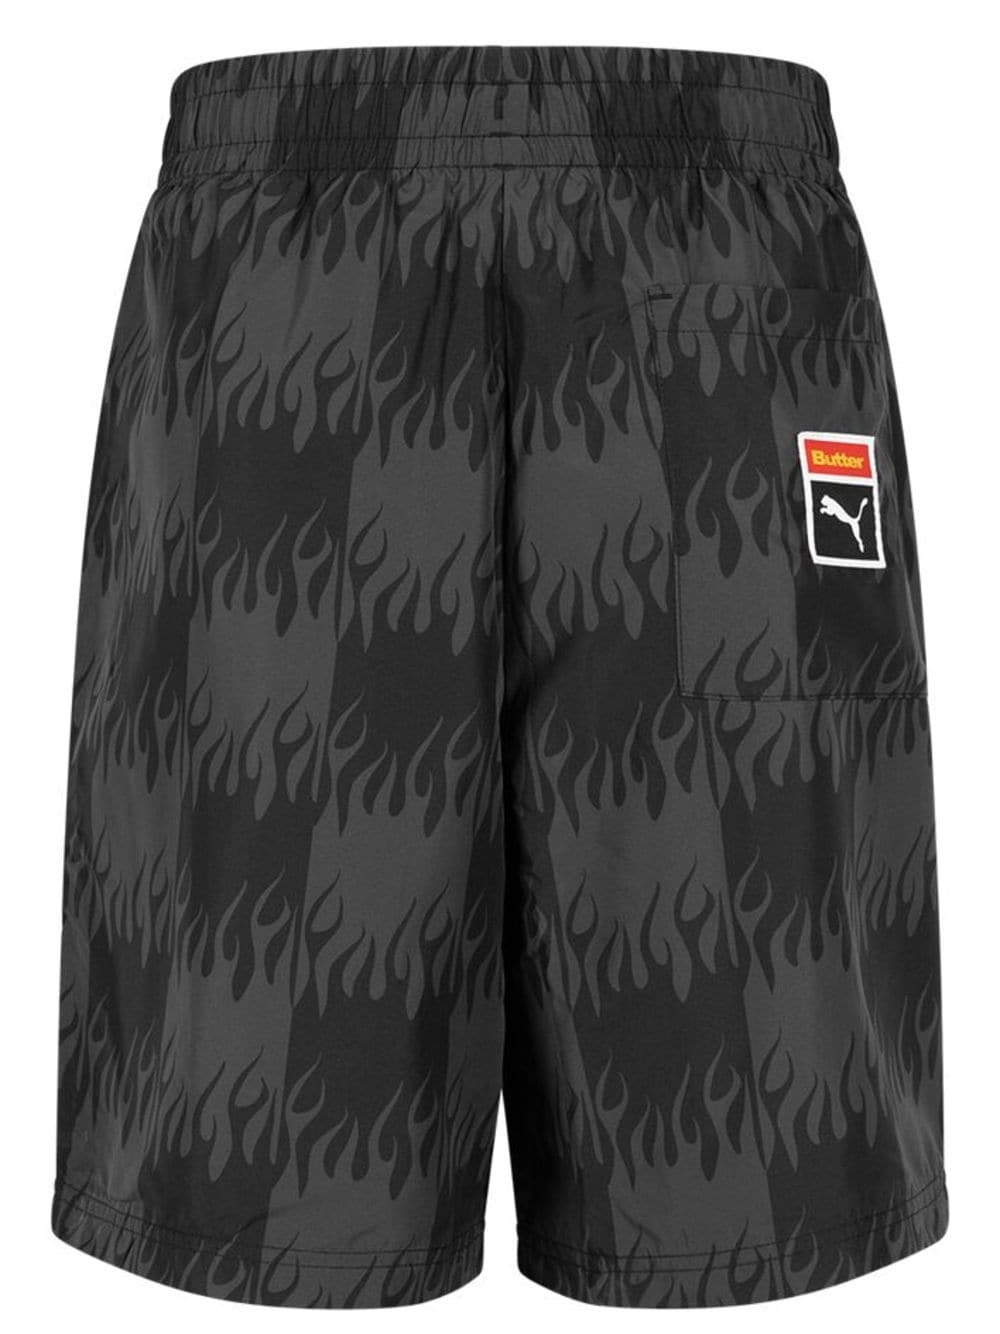 x Butter Goods 15 Year track shorts - 2